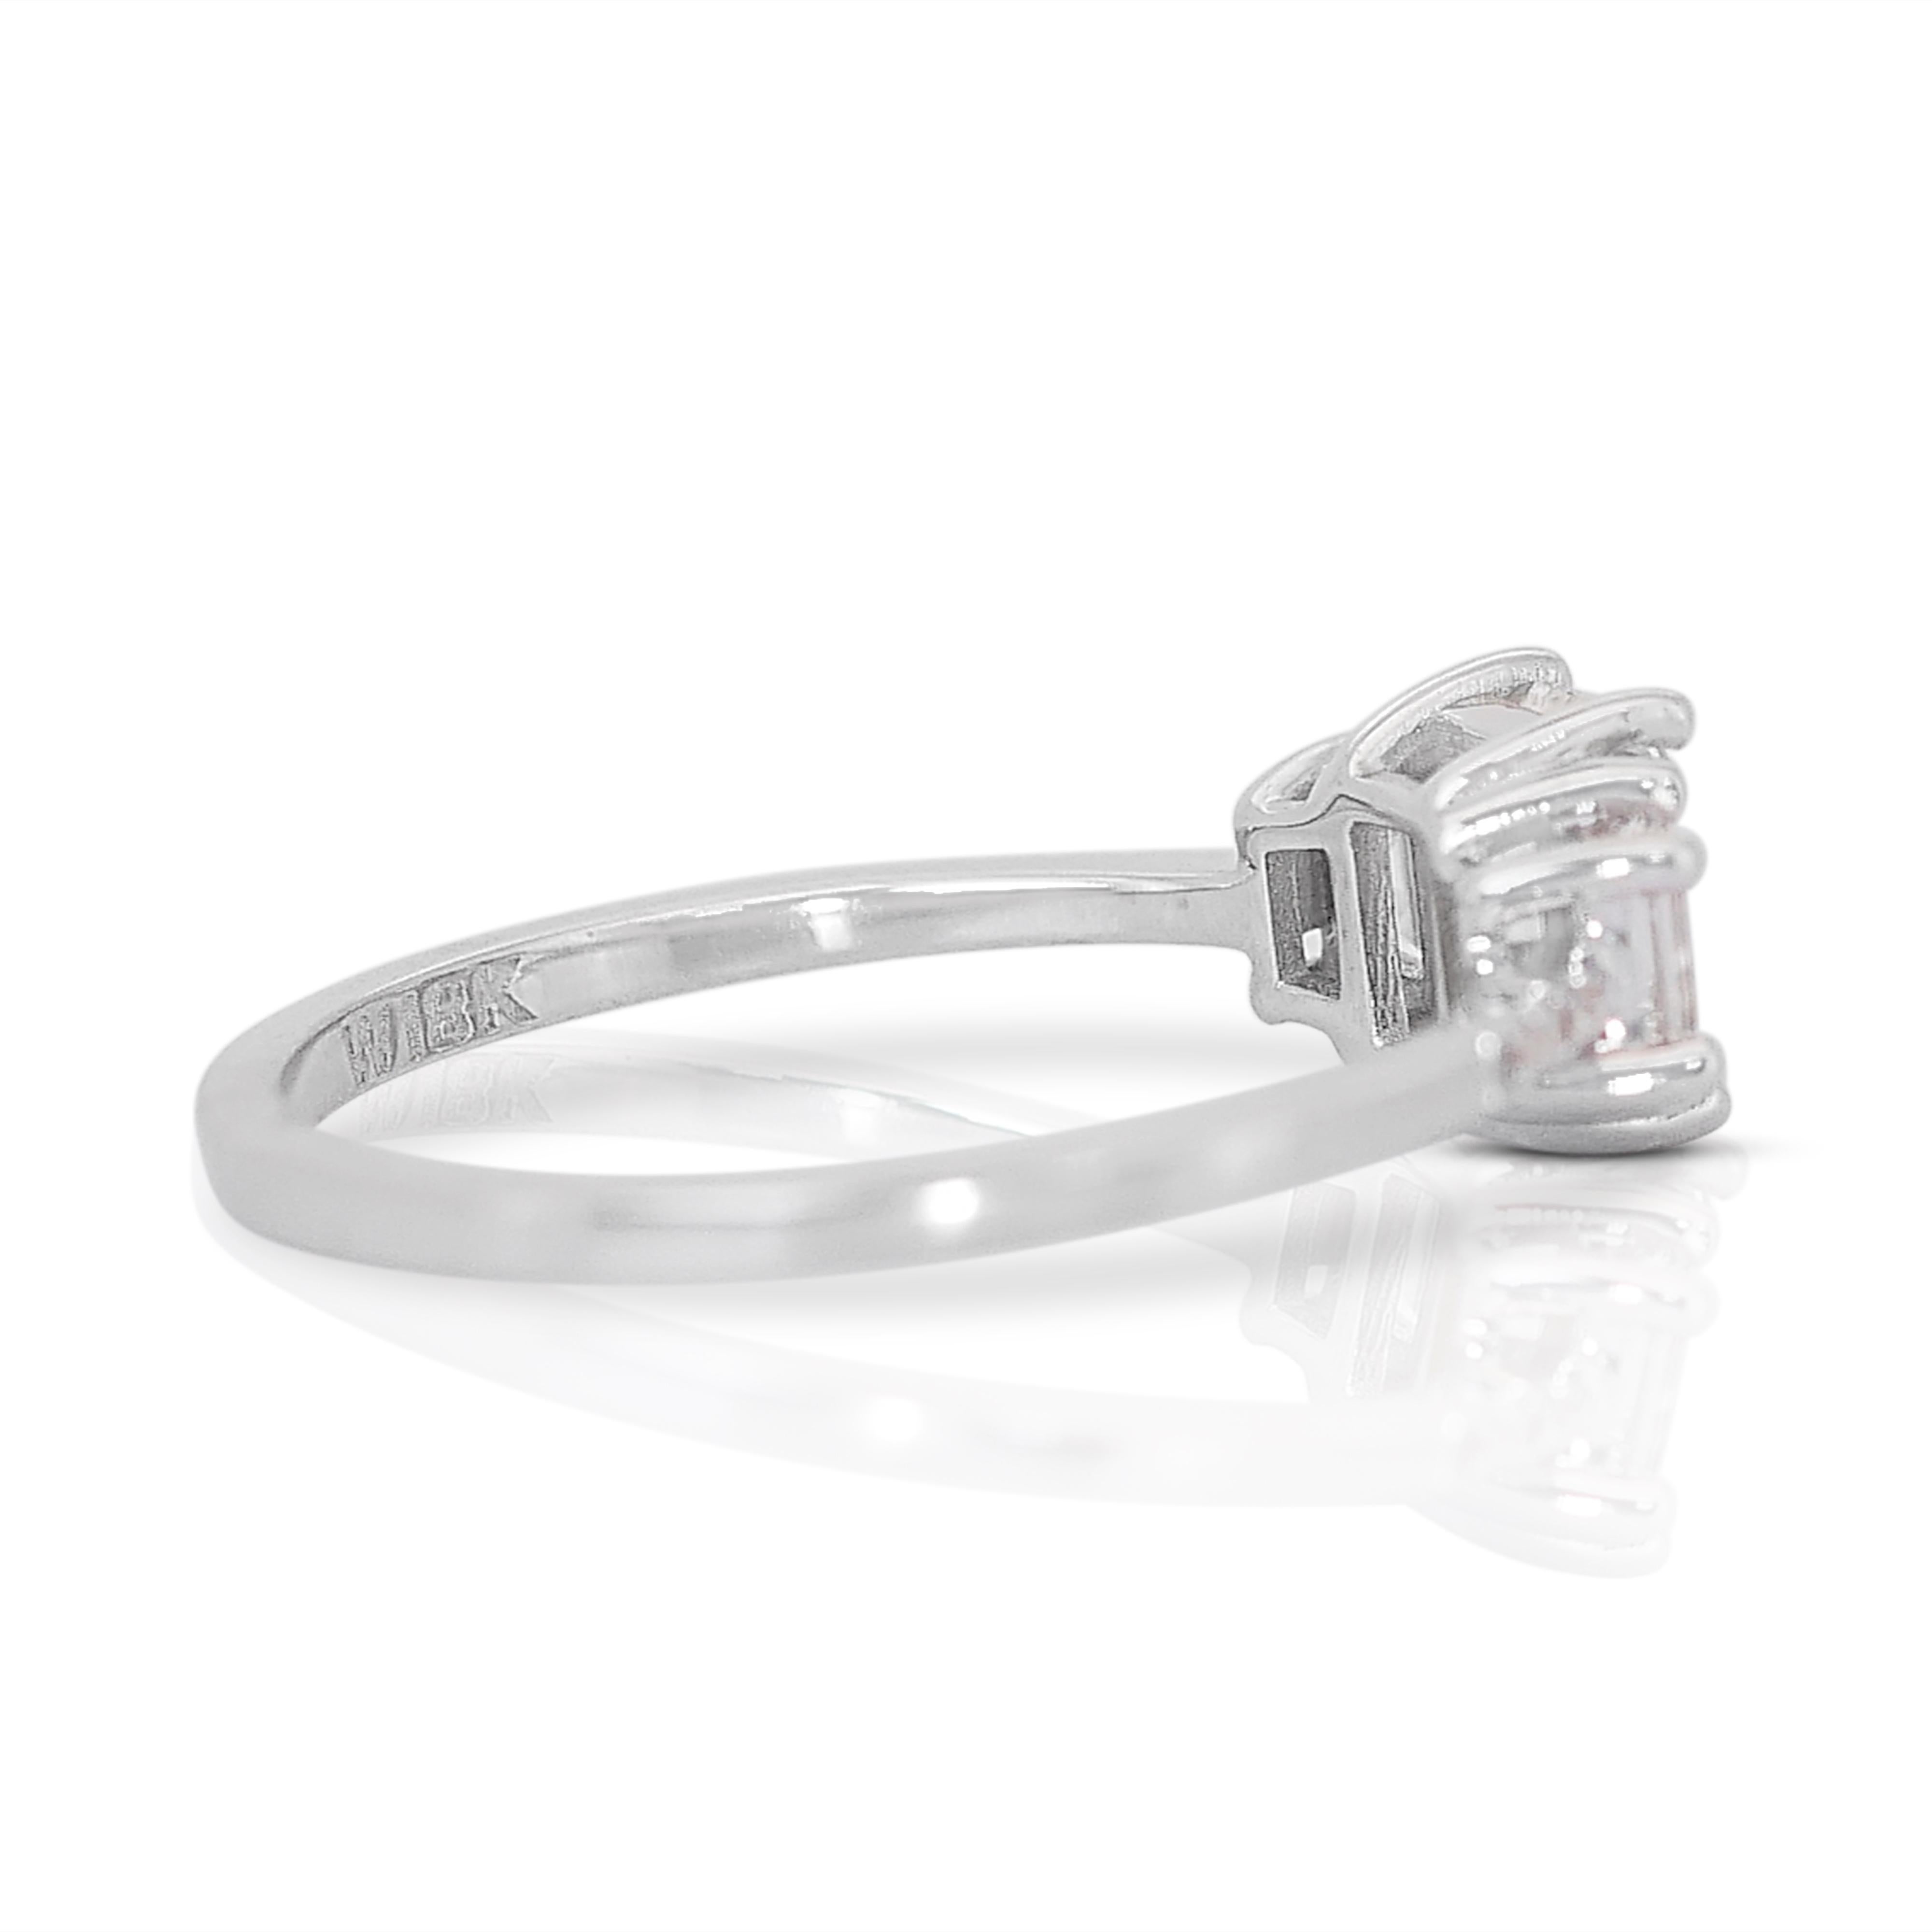 Lustrous 1.22ct Emerald-Cut Diamond 3-Stone Ring in 18K White Gold - GIA  In New Condition For Sale In רמת גן, IL